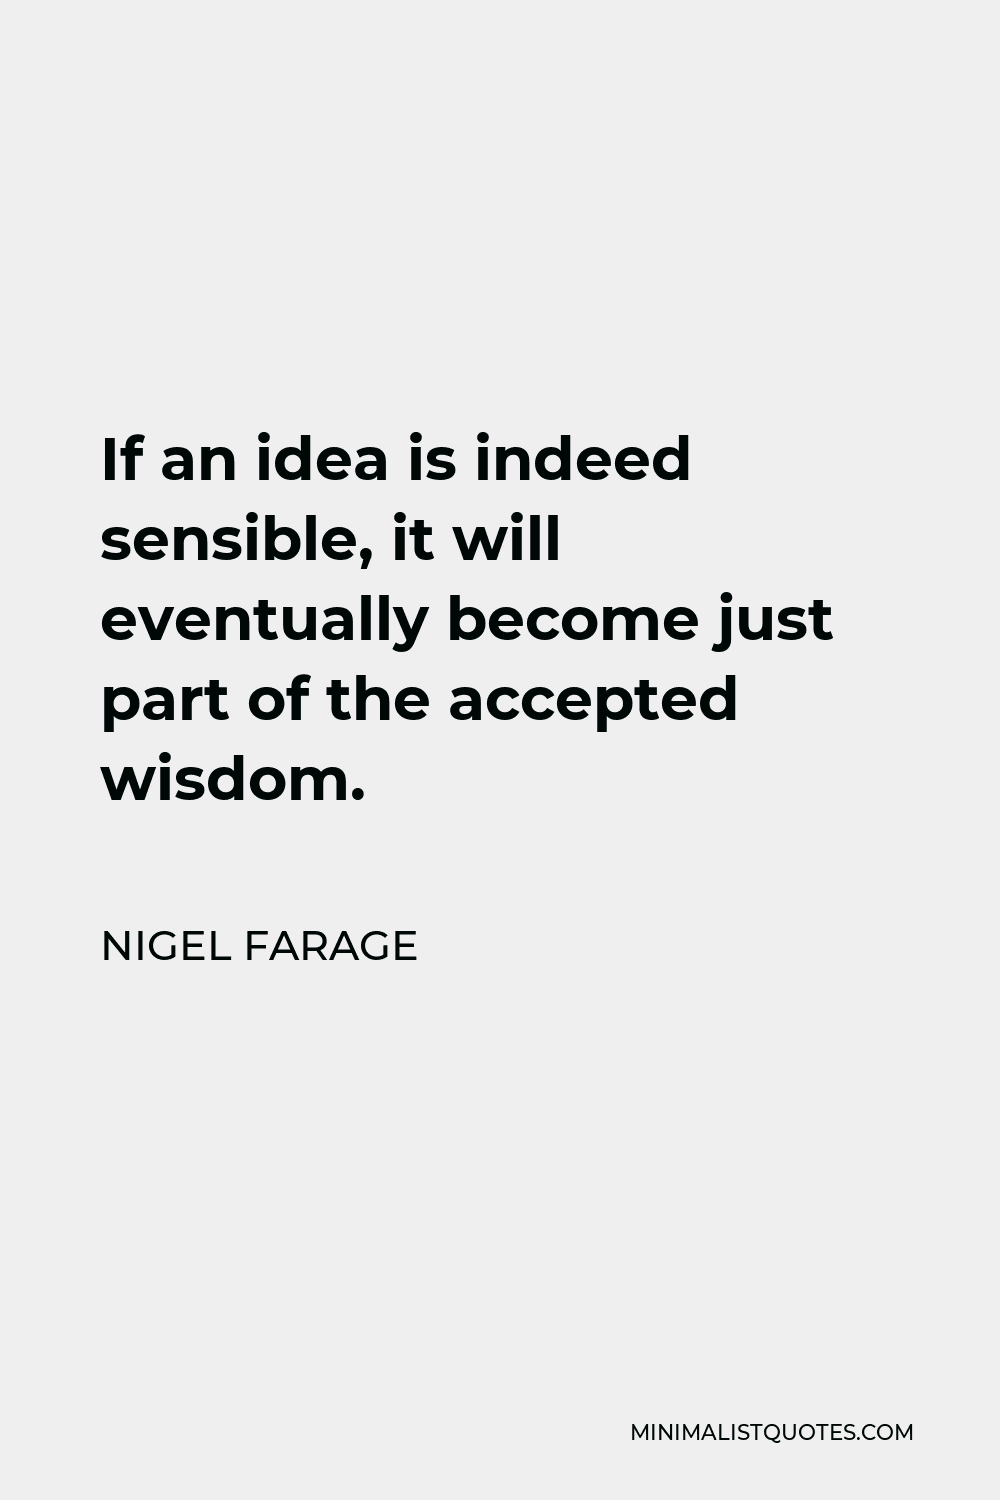 Nigel Farage Quote - If an idea is indeed sensible, it will eventually become just part of the accepted wisdom.